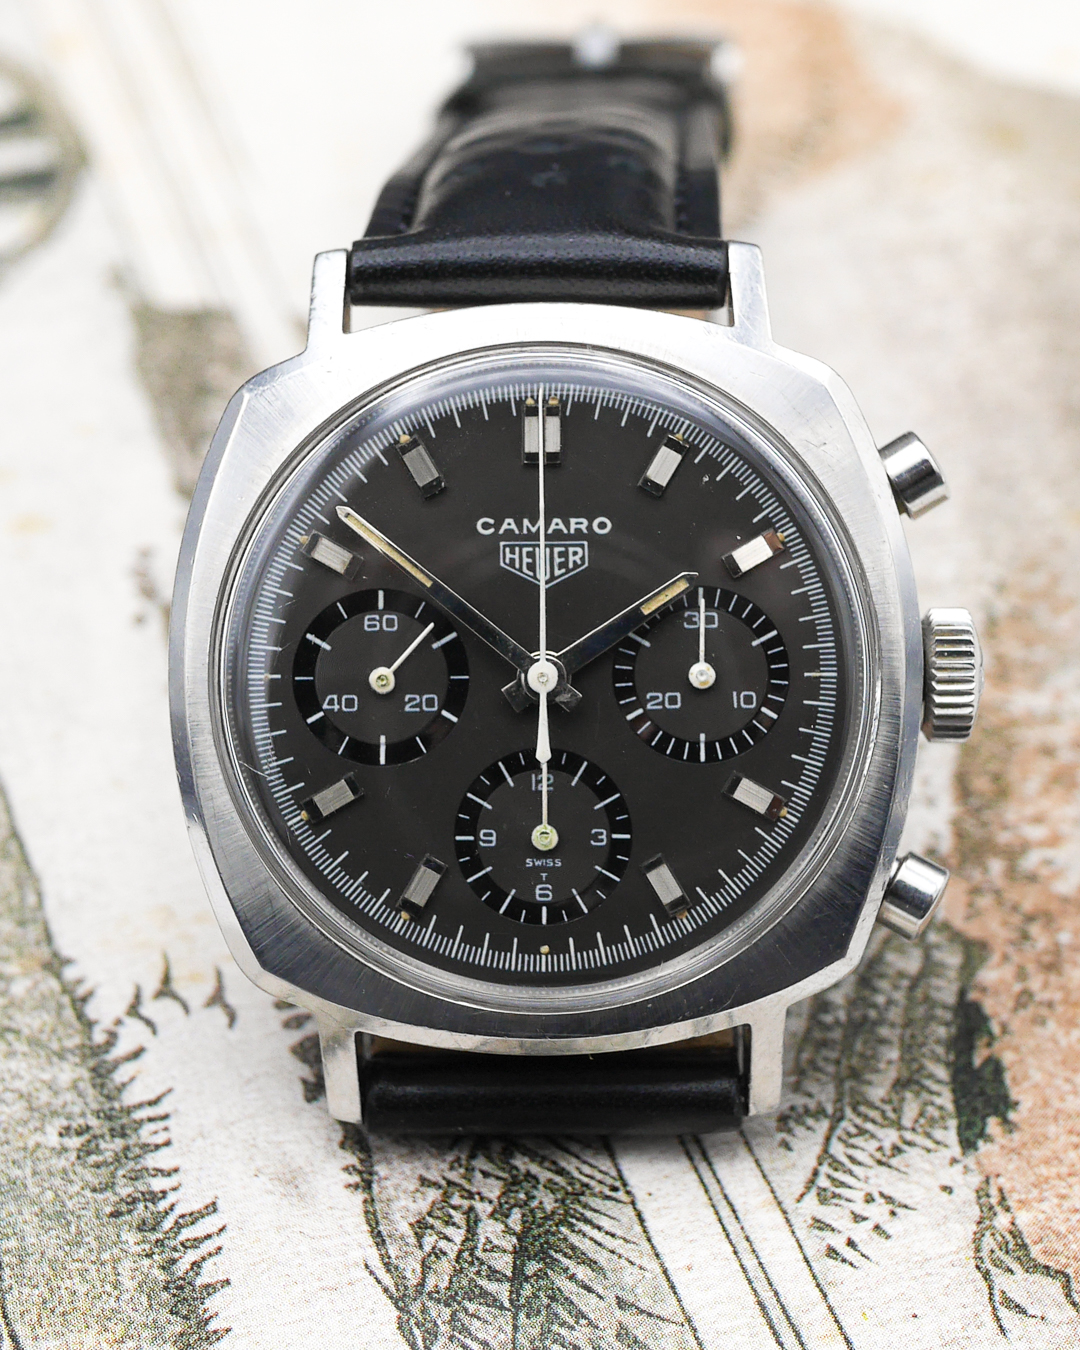 SOLD - Vintage Heuer Camaro ref. 7220NT Exotic CHOCOLATE Dial | Omega Forums